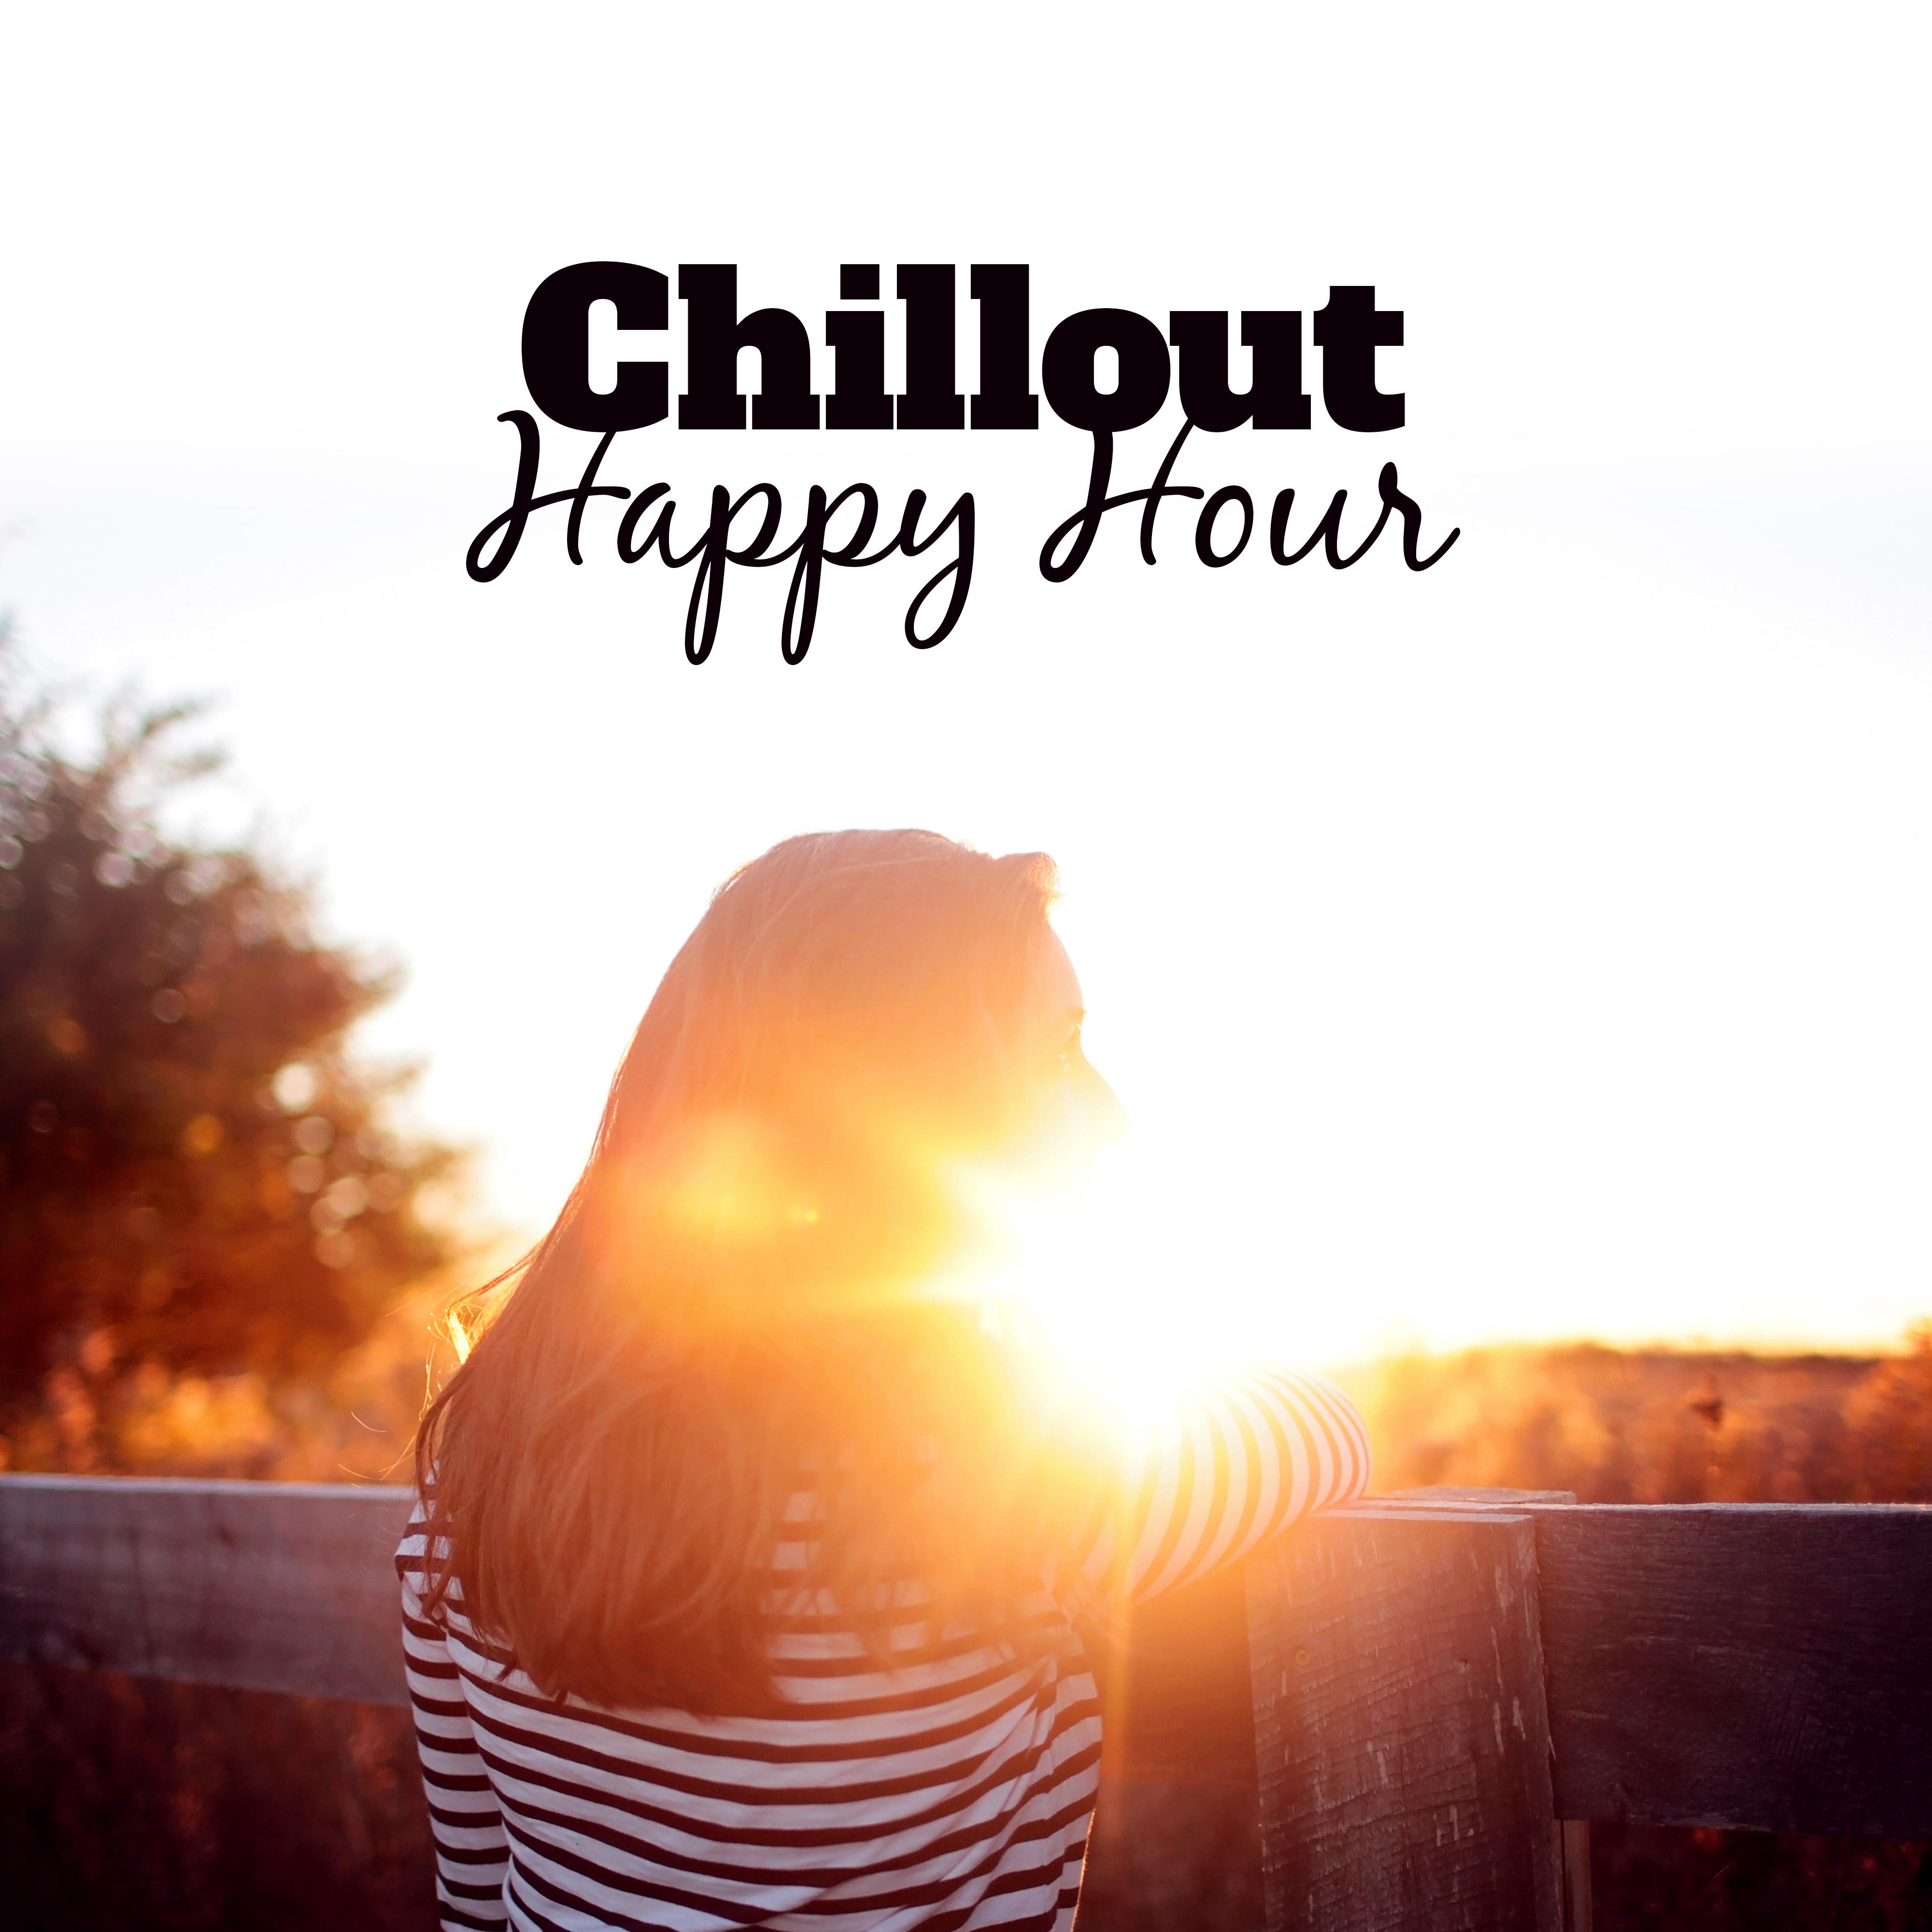 Chillout Happy Hour  Baleares Islands, Chill Out 2017, Deep Chill Out, Lounge, Tropical Beats